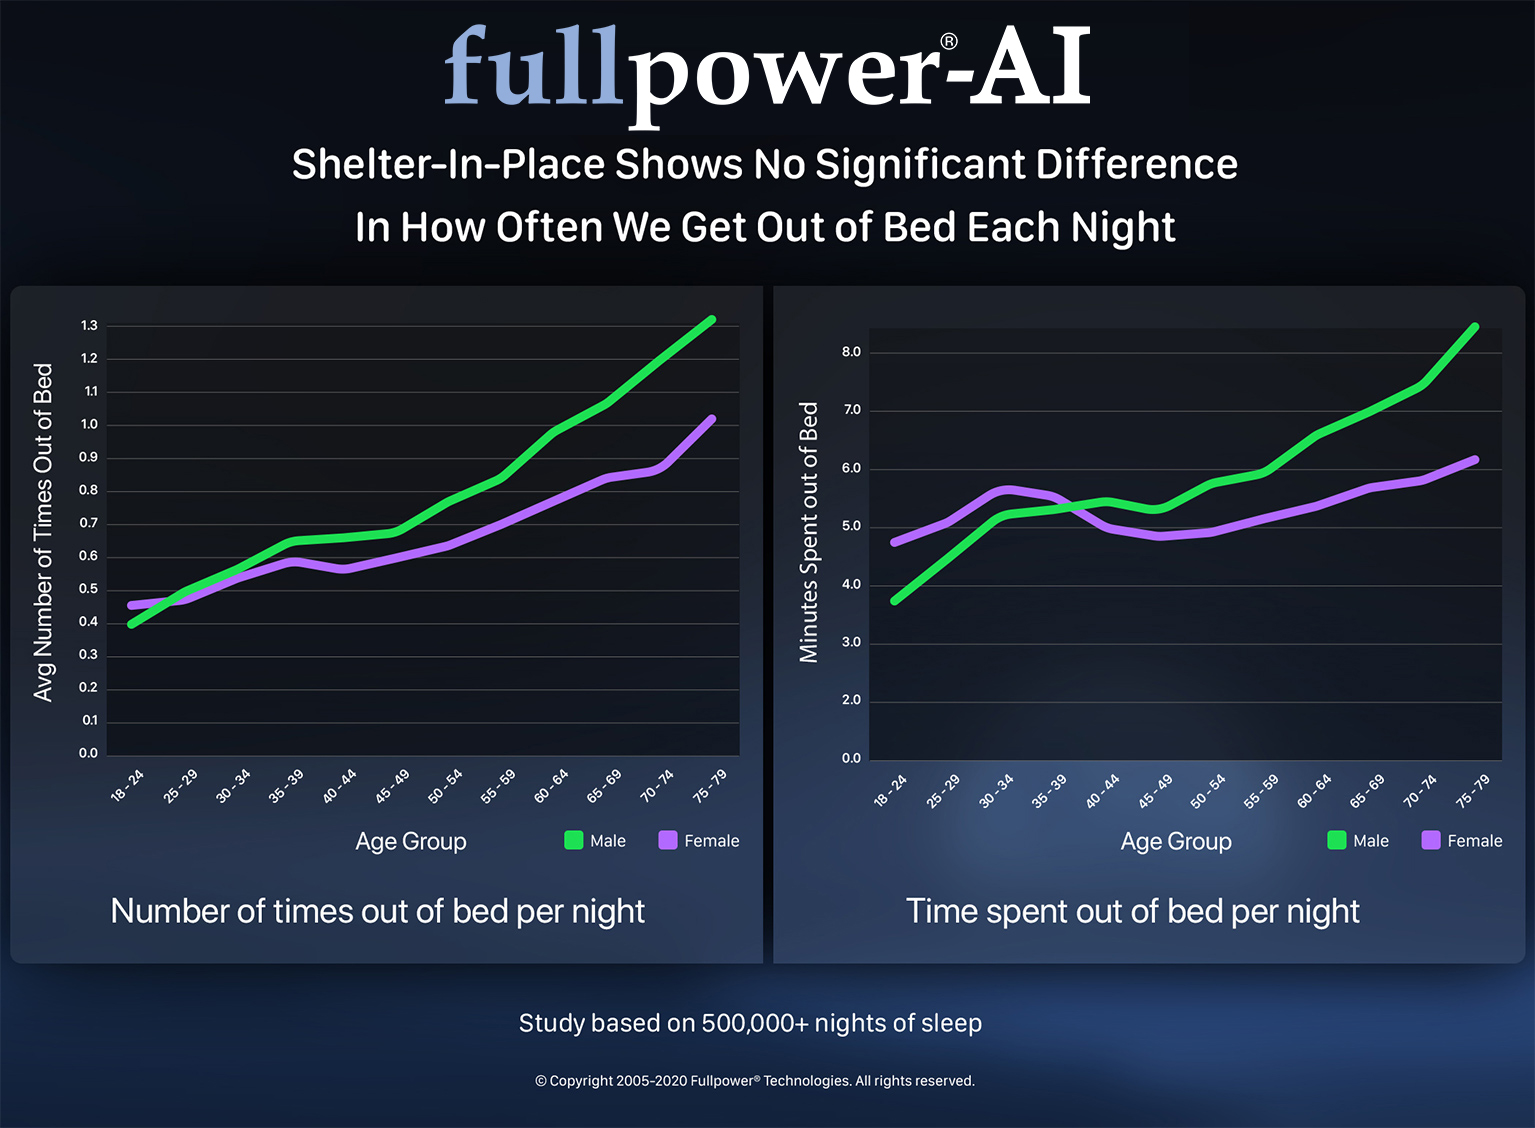 Shelter-in-Place Shows No Significant Difference In How Often We Get Out of Bed Each Night